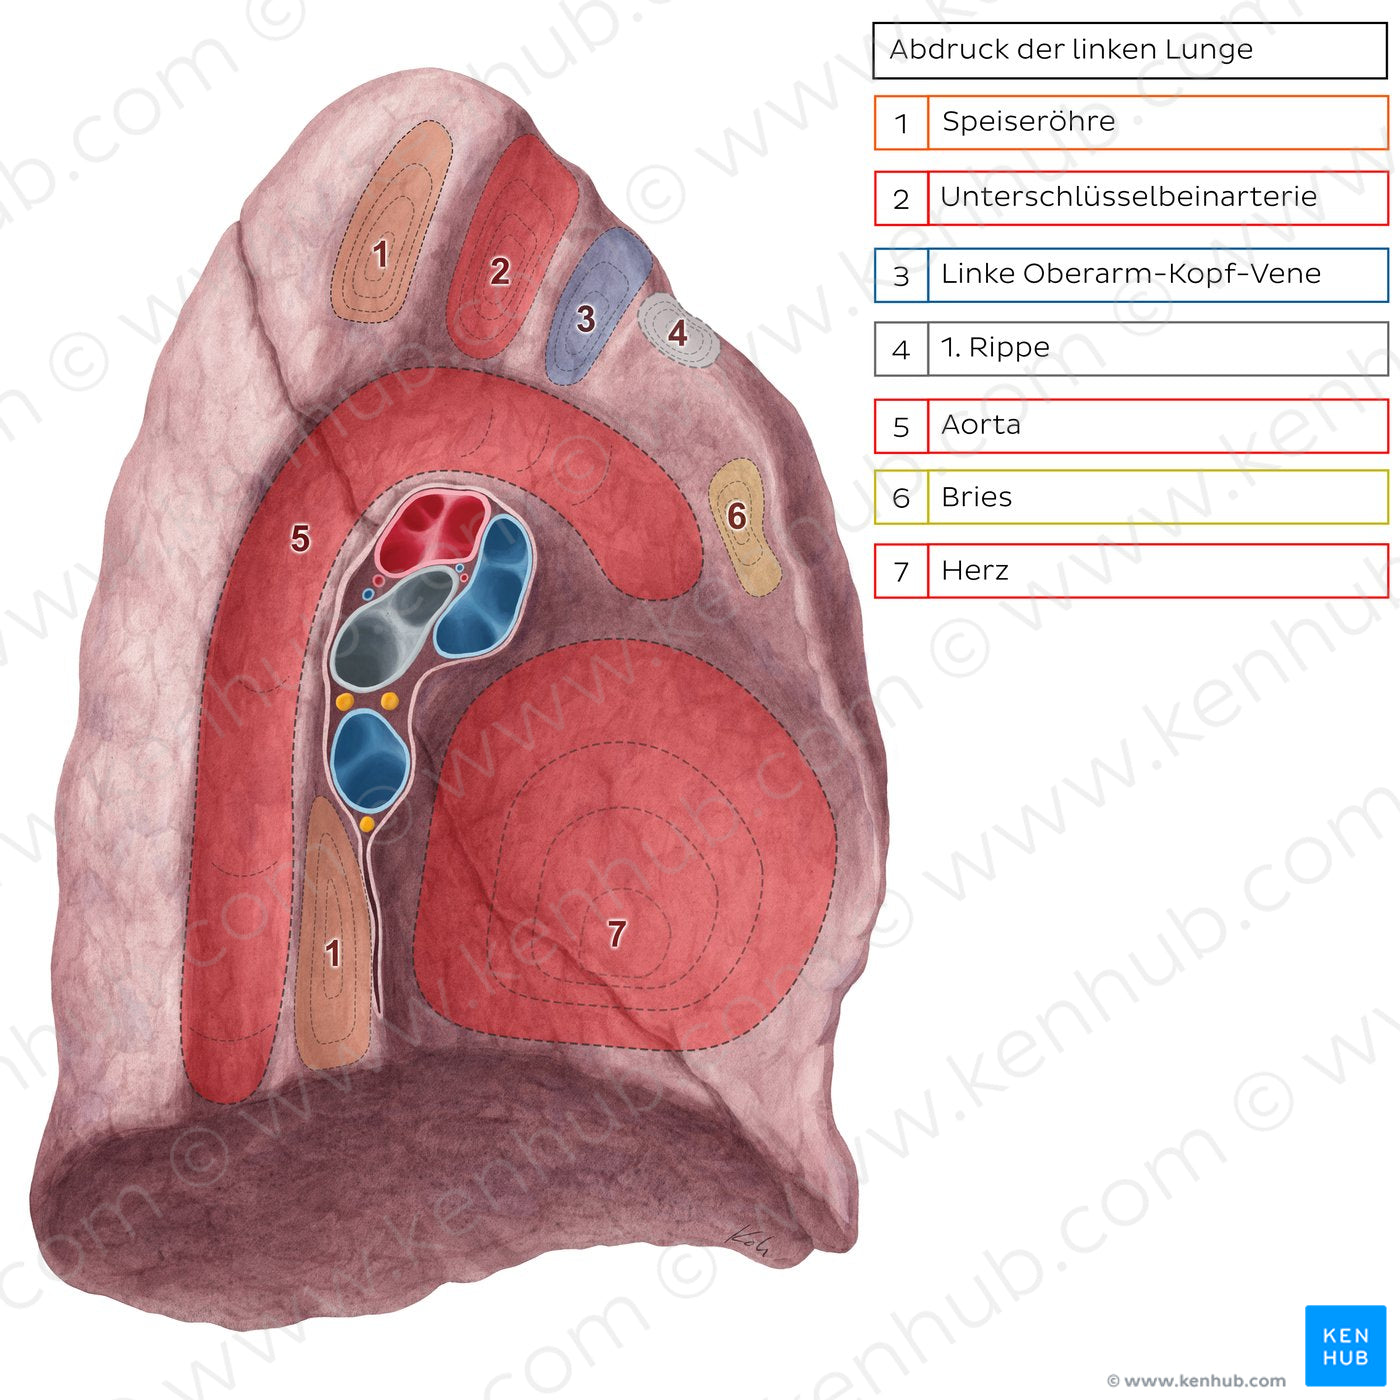 Impressions of left lung (German)